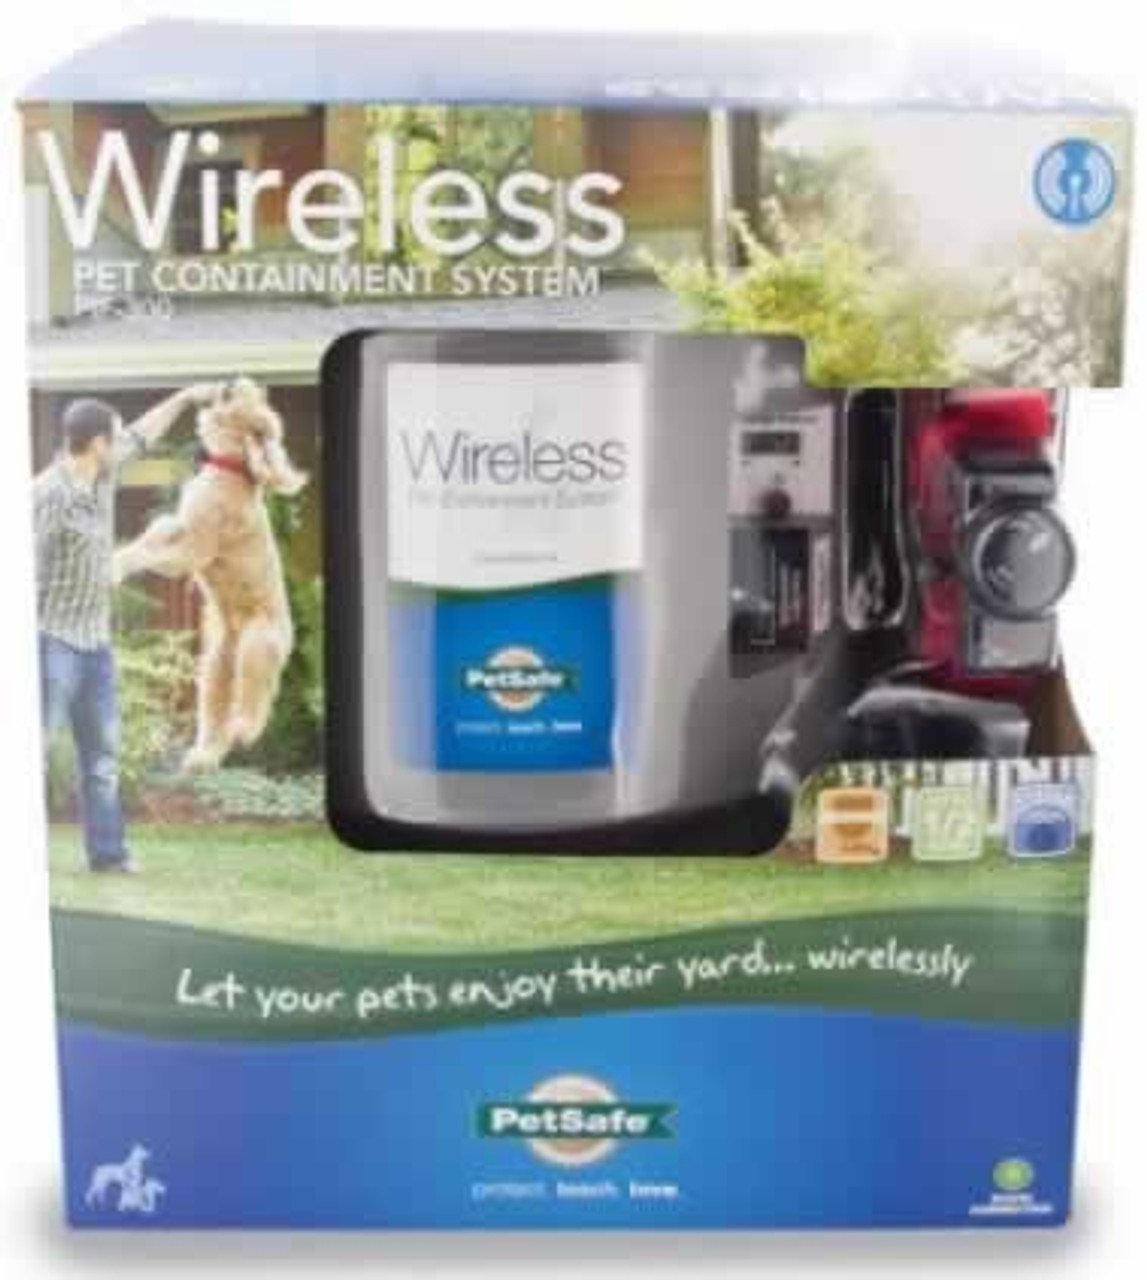 PetSafe Wireless Containment System - CountryMax